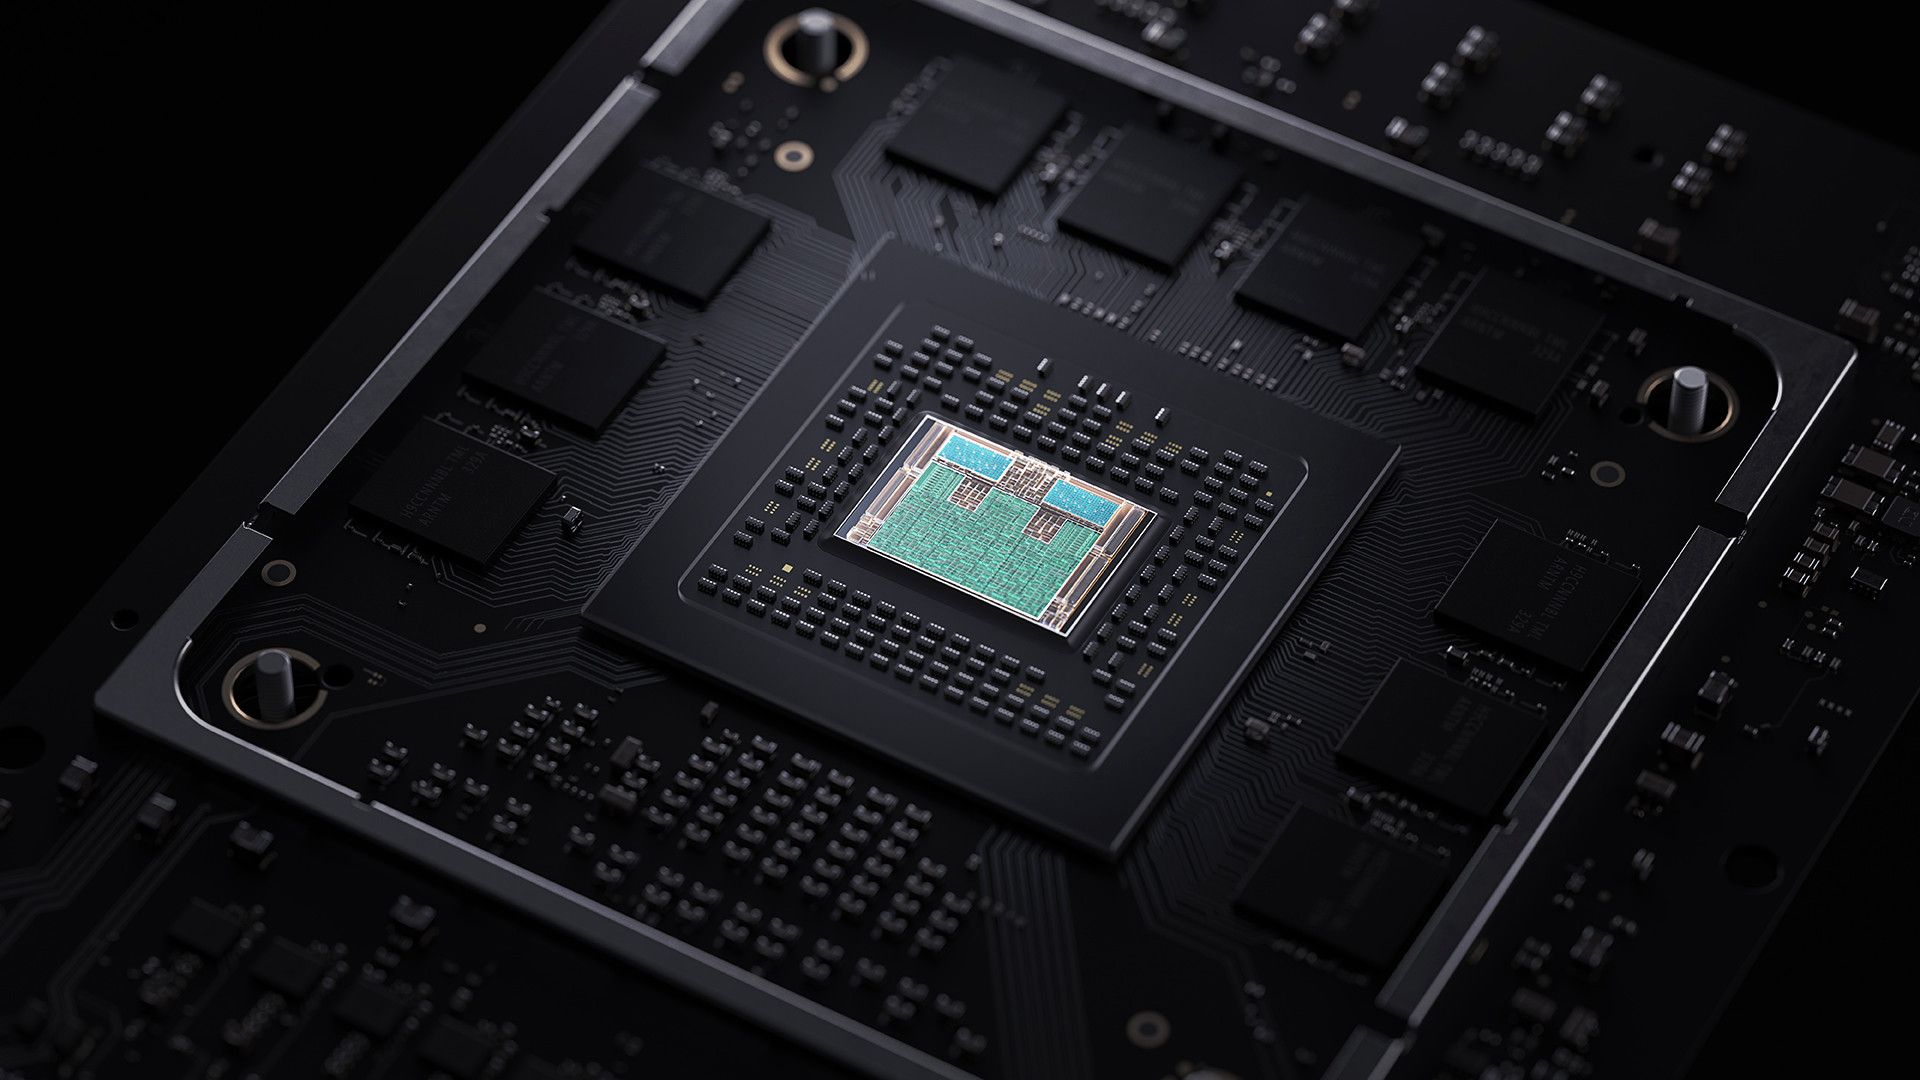 Xbox Series X: A closer look at the technology powering the next generation